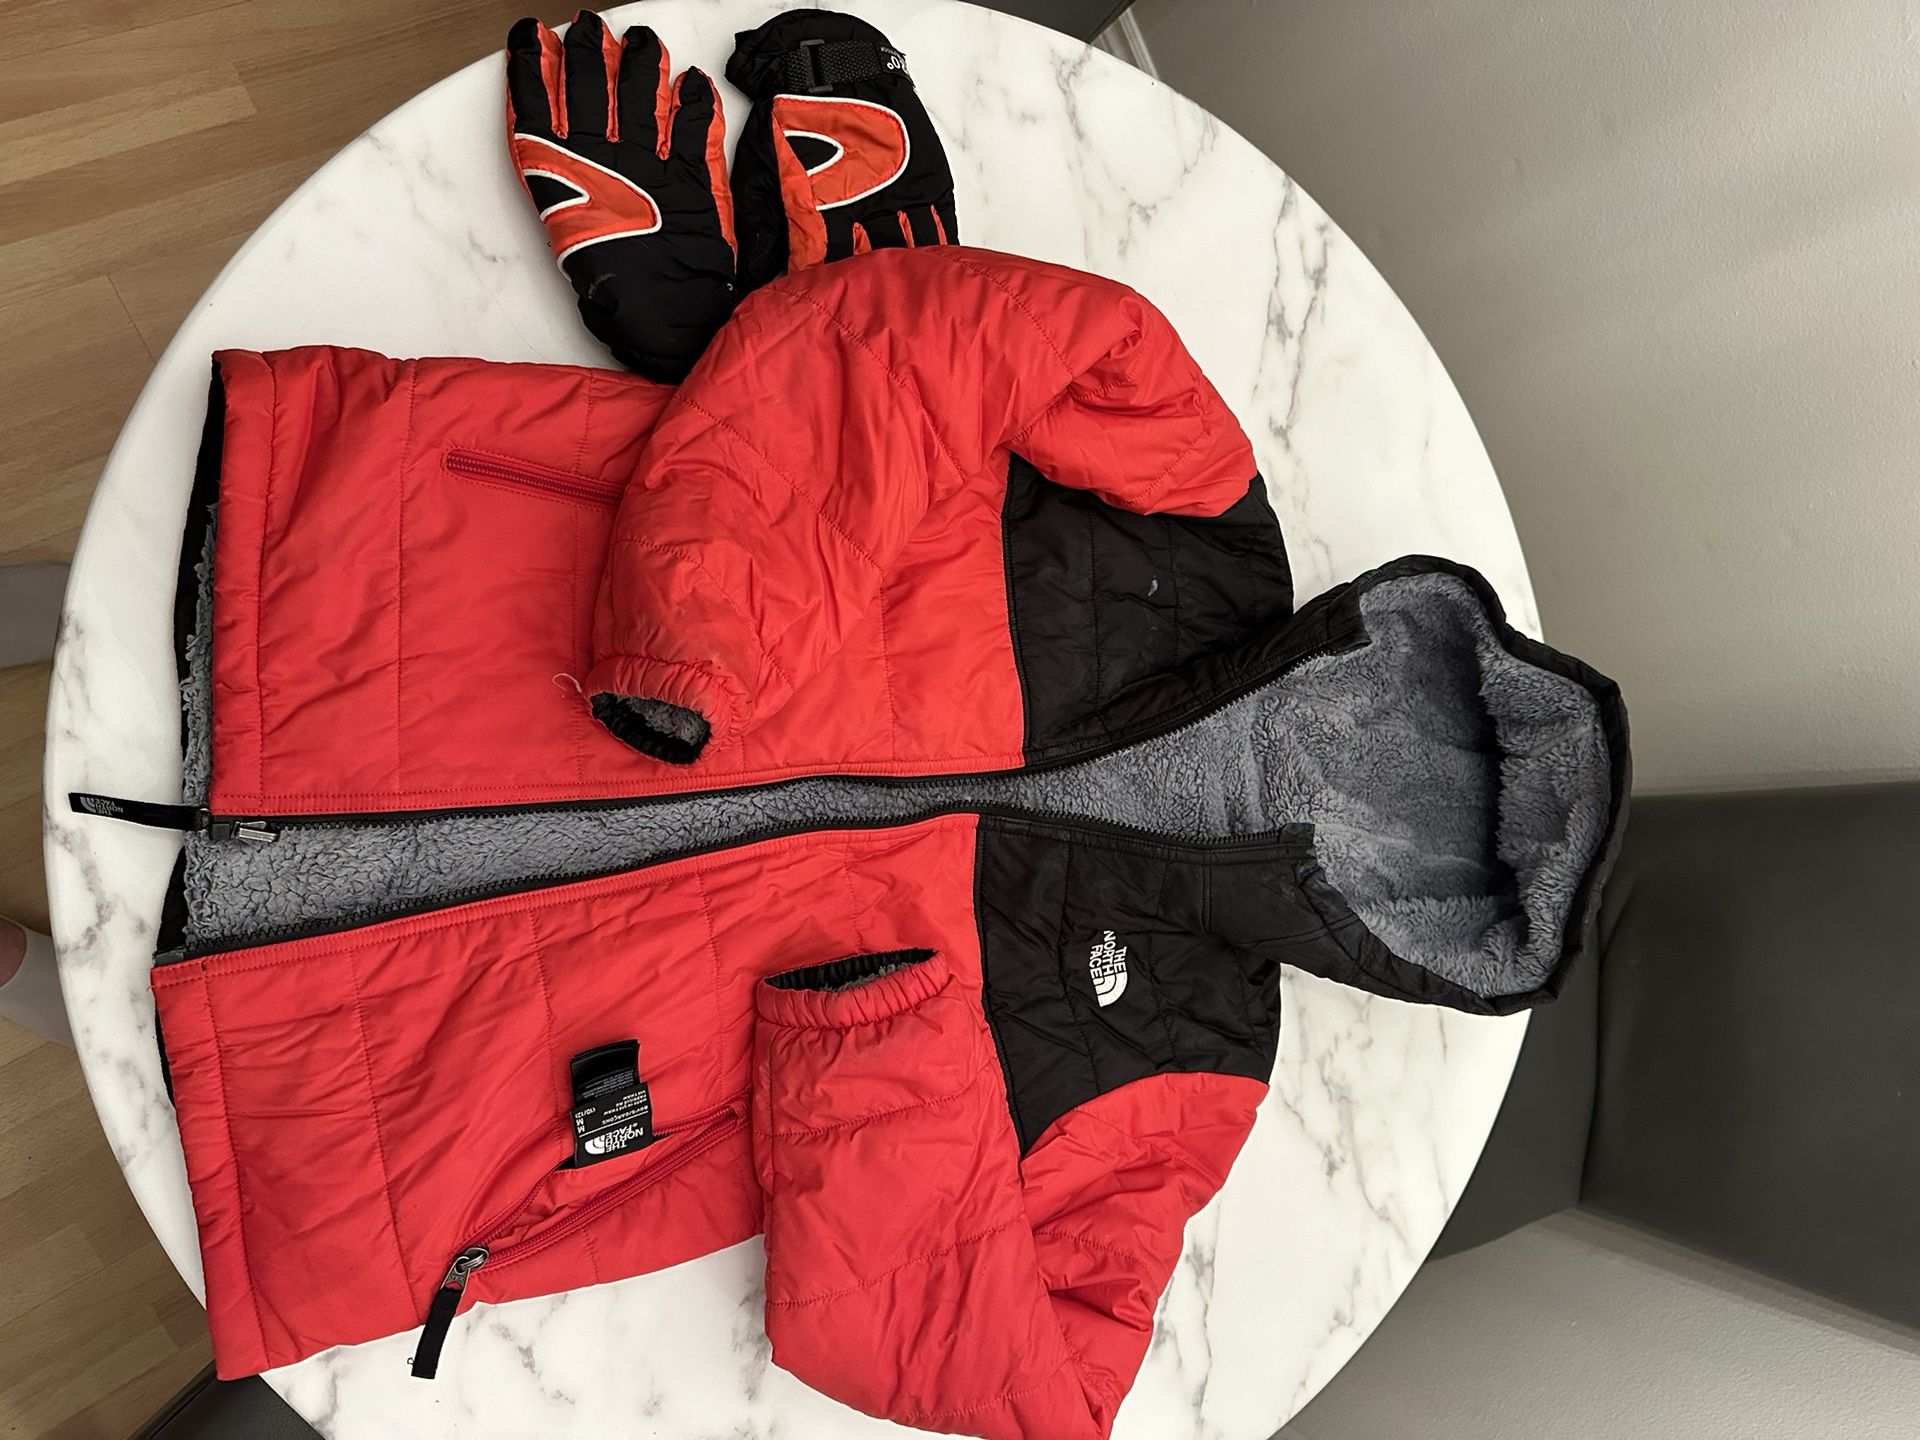 North face - Youth Size 10/12 Reversible Jacket And Gloves